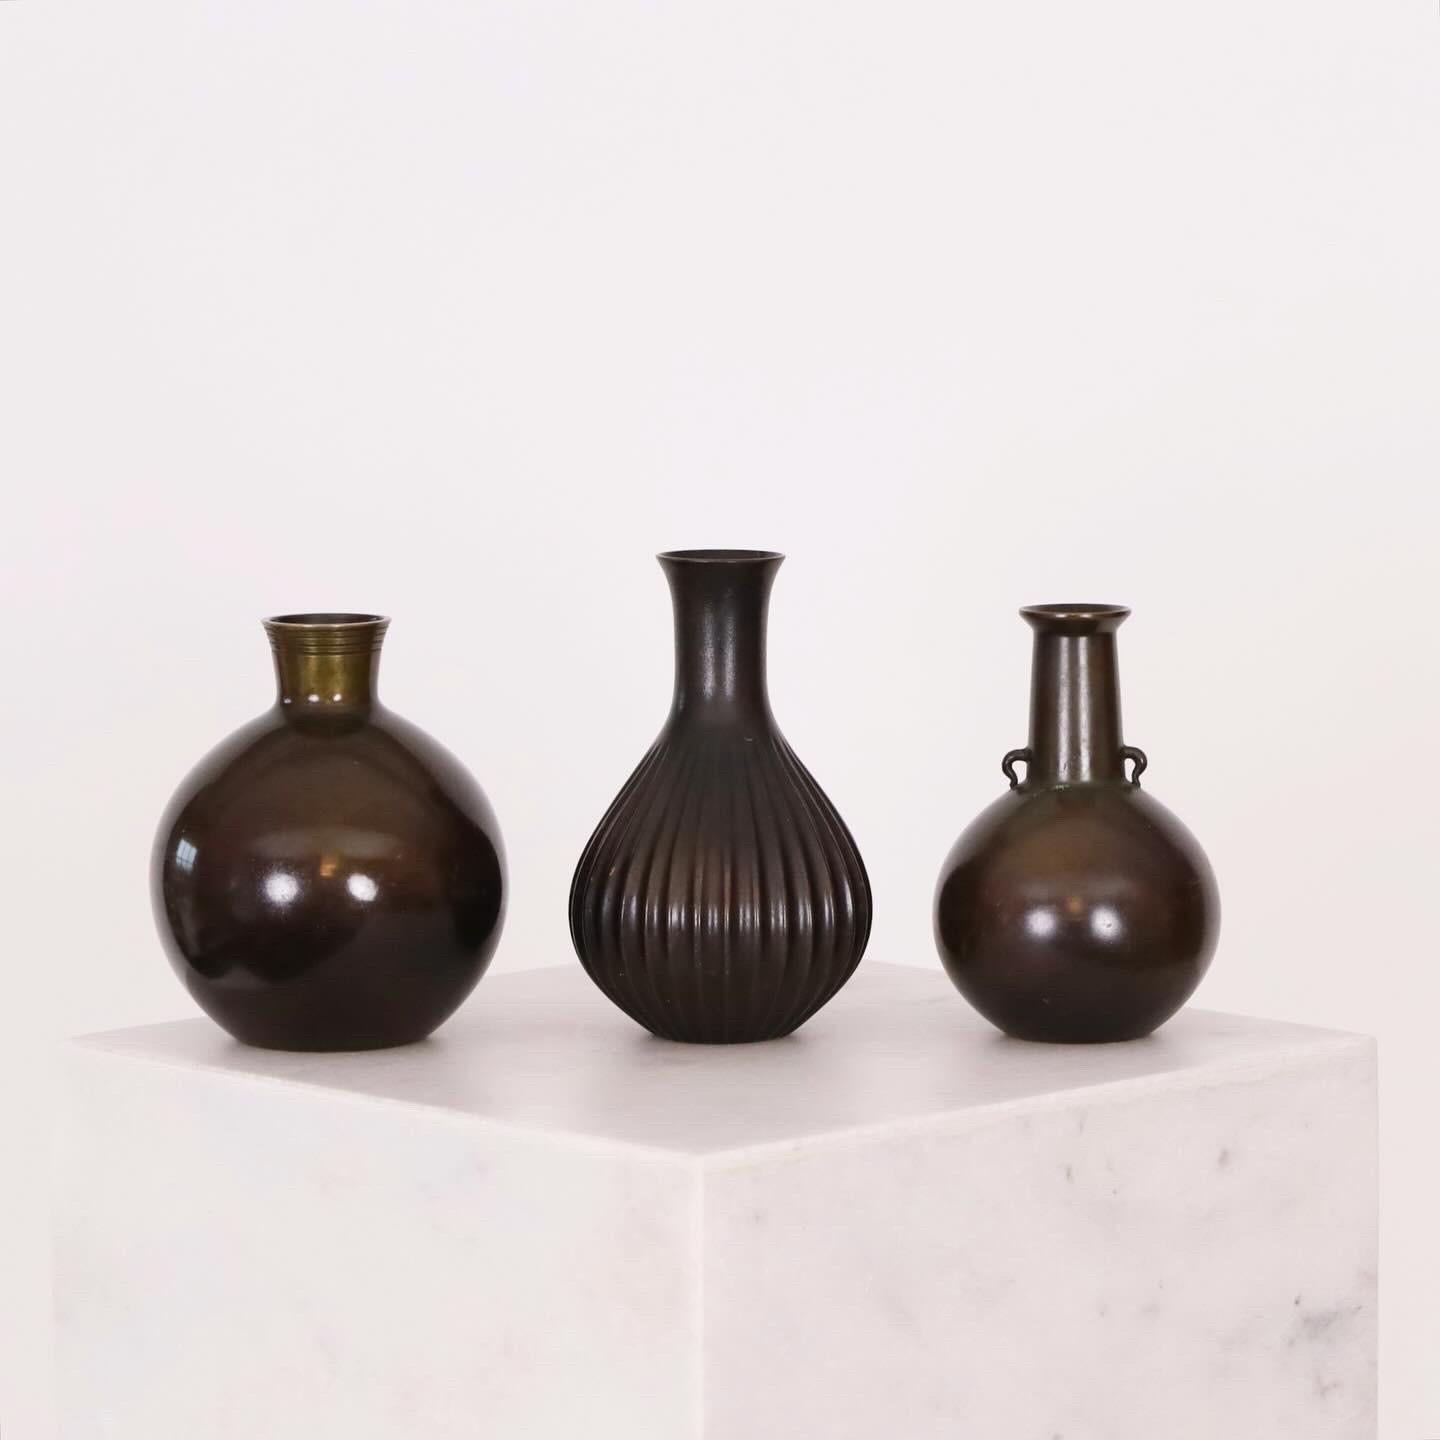 A collection of small bronze vases designed by Just Andersen in the 1920s. A true testament to Andersen's exceptional skills and a timeless addition to any beautiful space.
 
* A trio of small drop-shaped bronze vases
* Designer: Just Andersen 
*